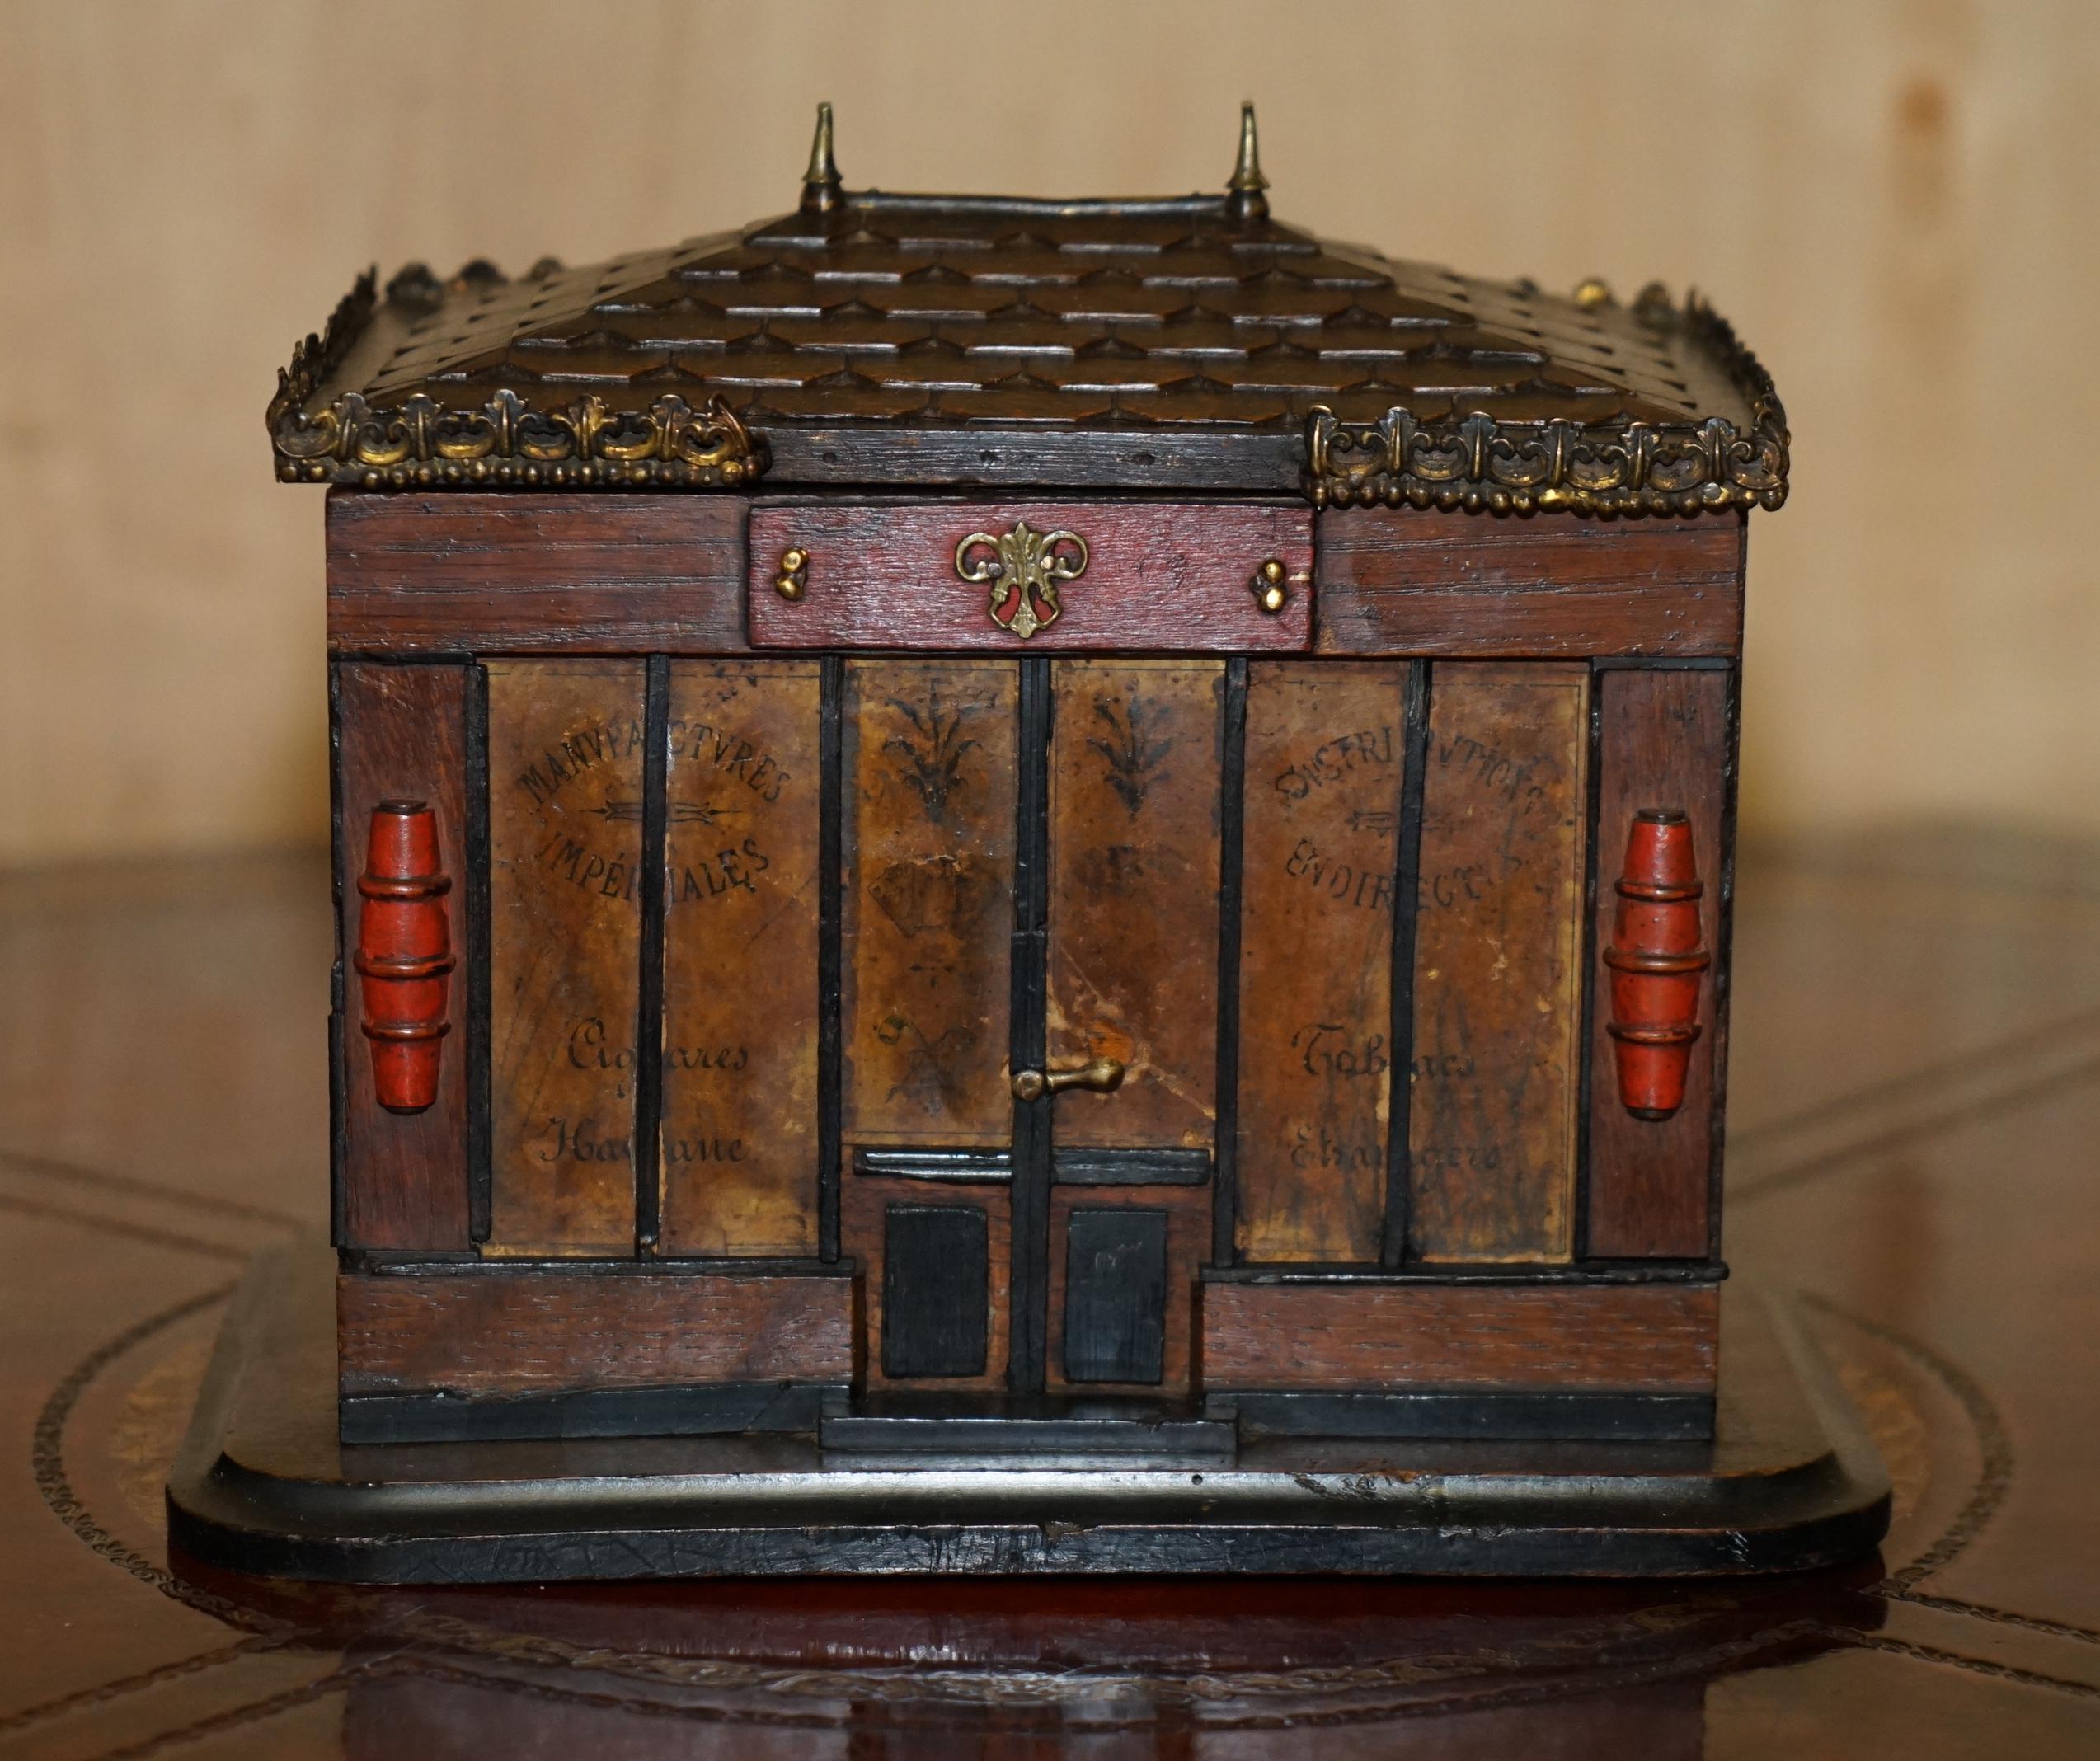 Royal House Antiques

Royal House Antiques is delighted to offer for sale this rather lovely antique original circa 1880-1900 French made Pagoda top Chinese shop cigar box

A very good looking and well made piece, it is hand carved all over